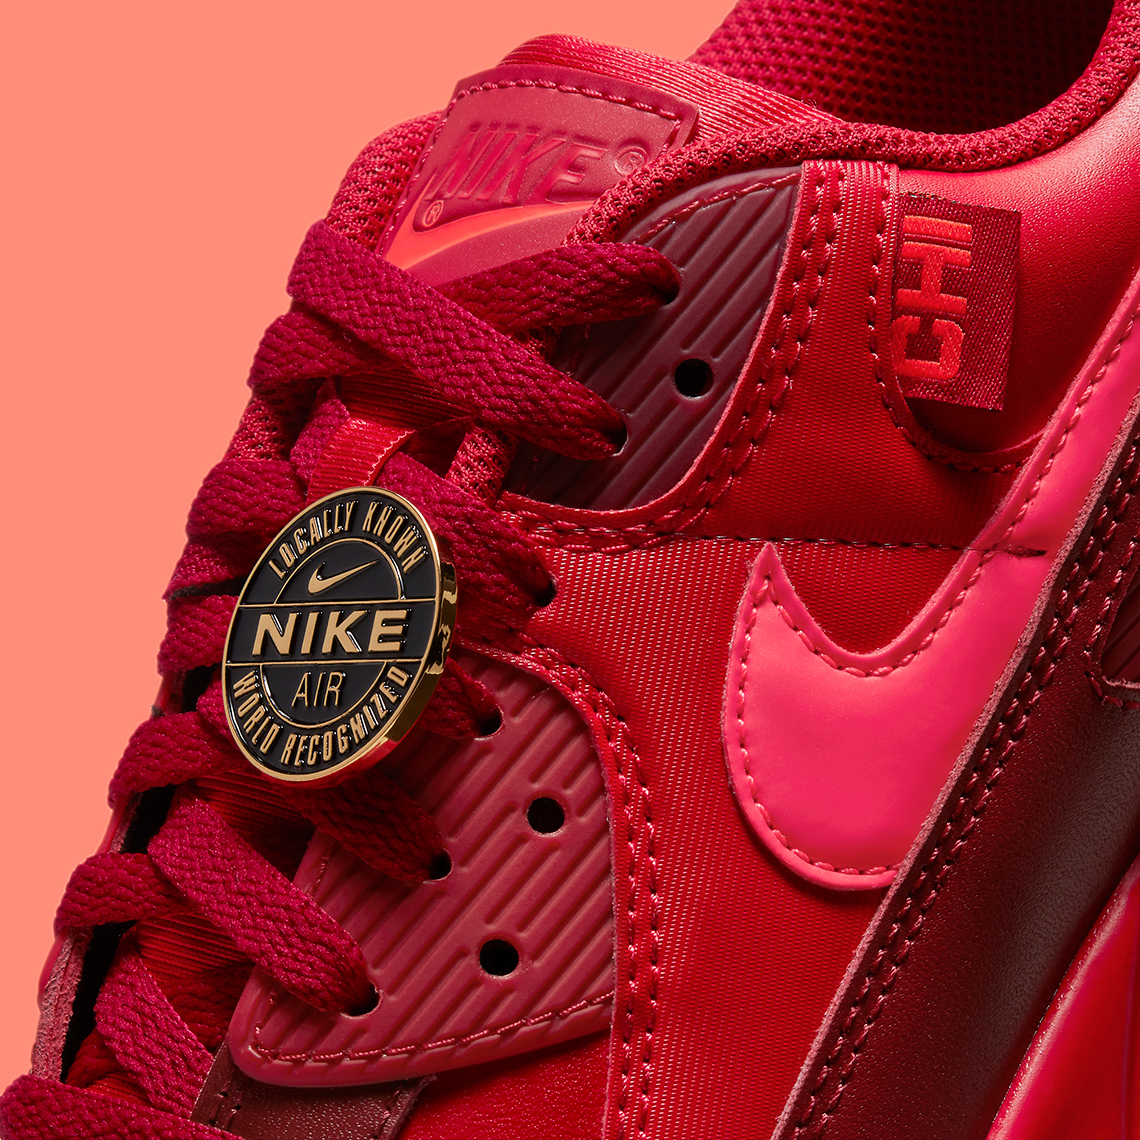 Nike Max 90 "City Special" CHI Chicago DH0146-600 |